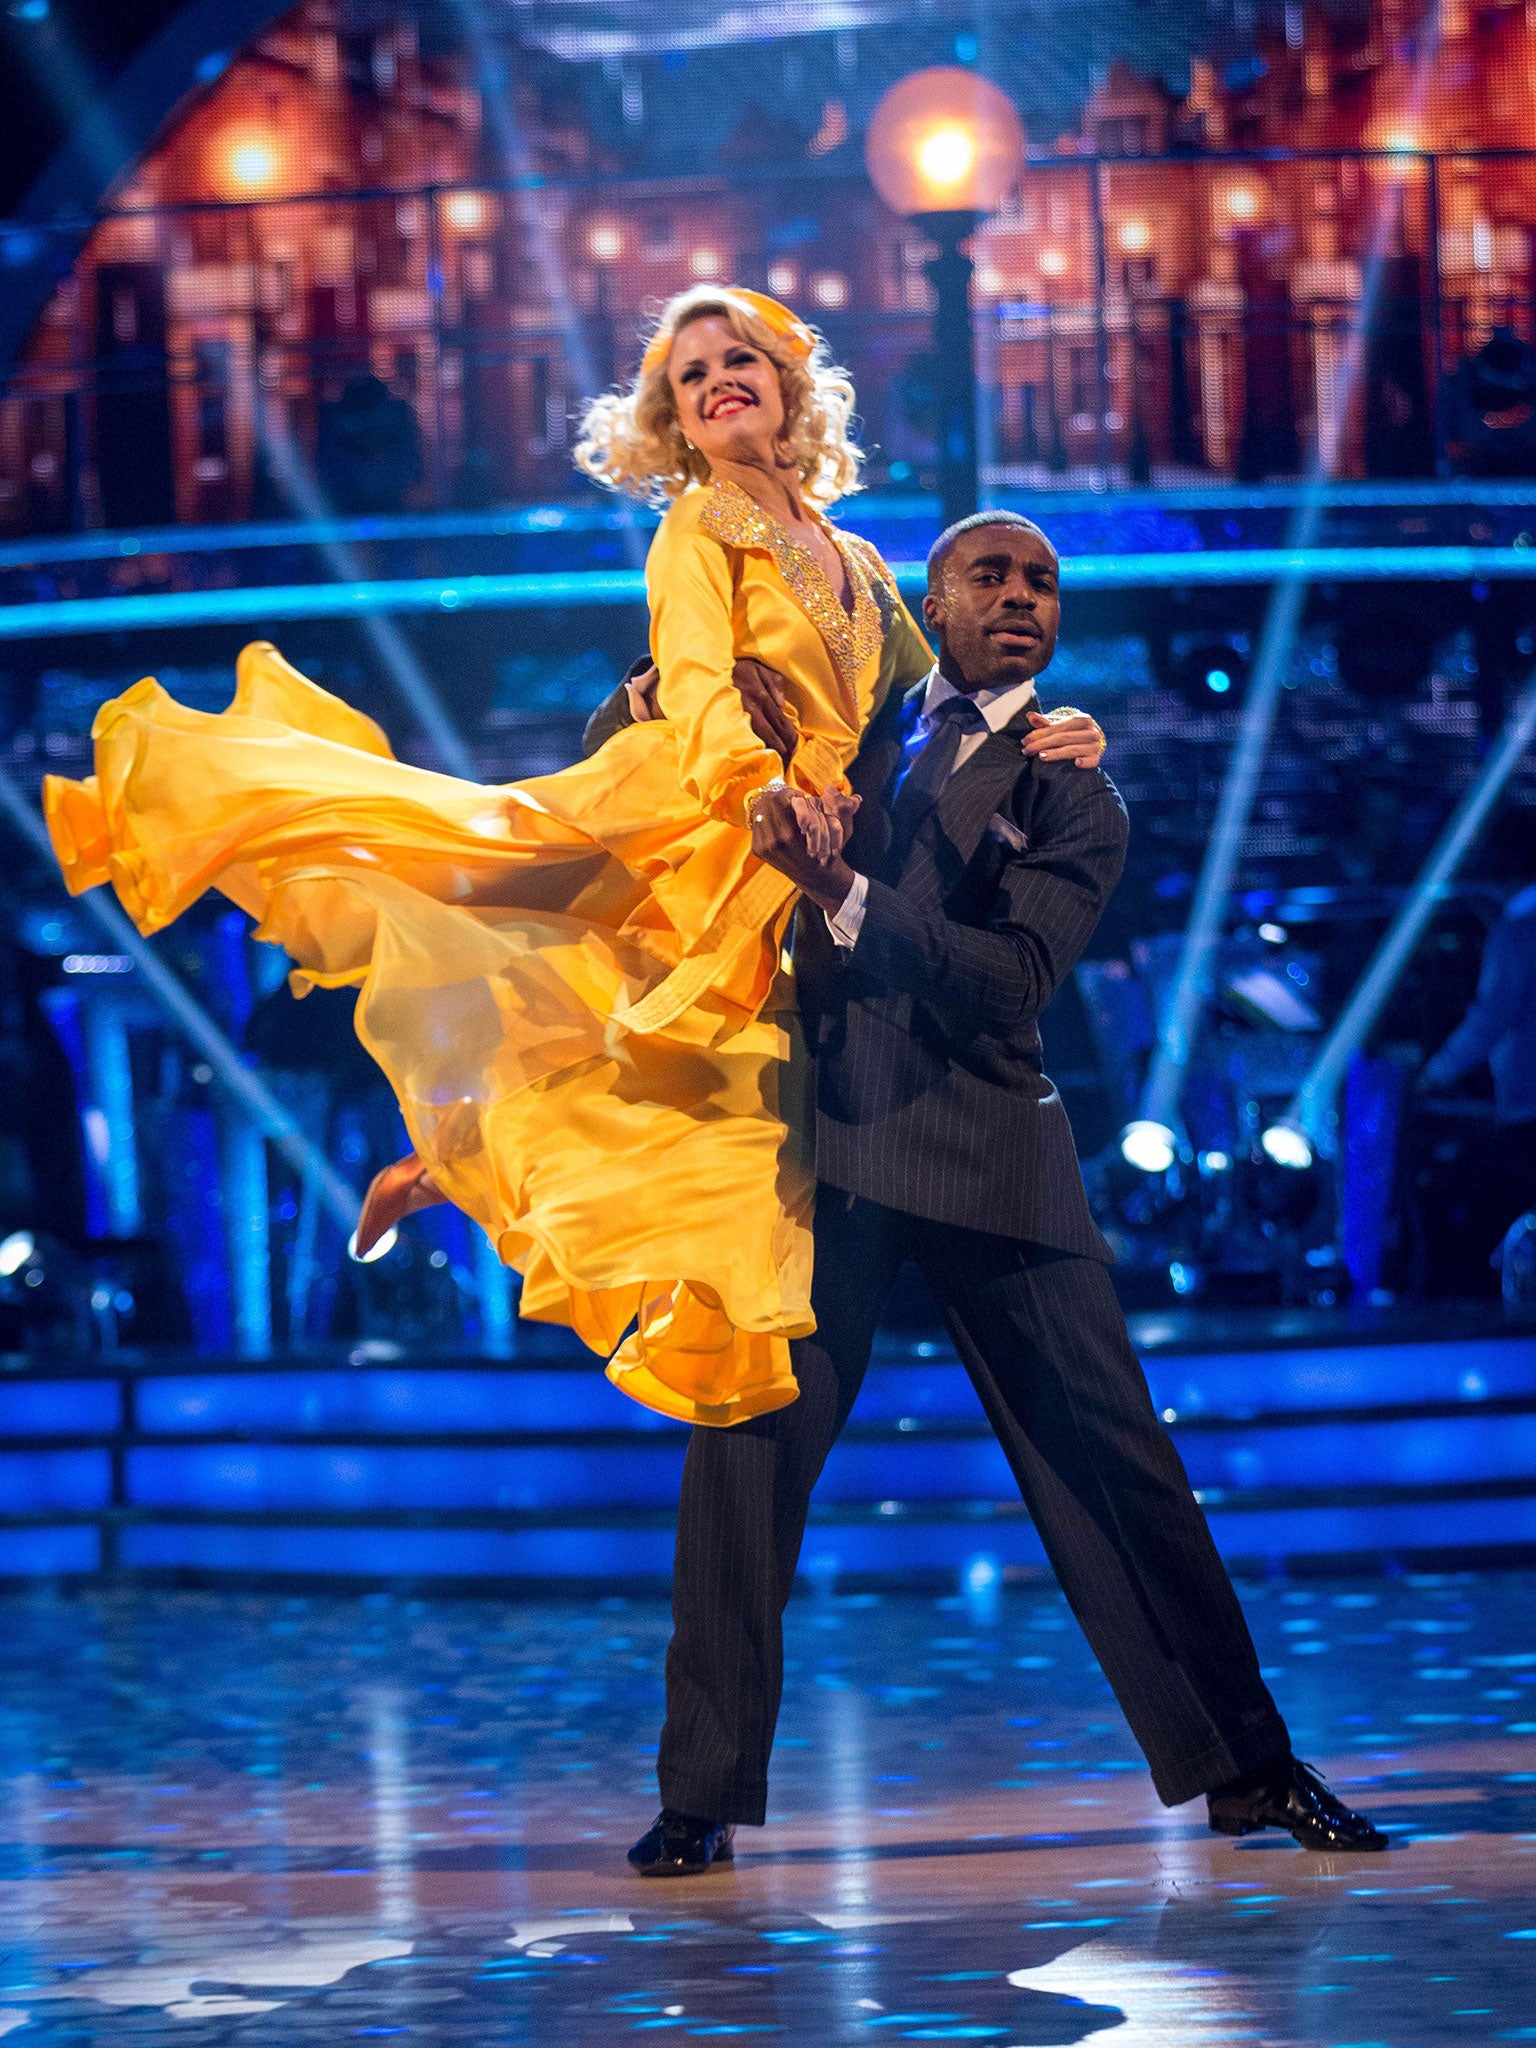 Strictly champion Ore Oduba says he put family on hold to win